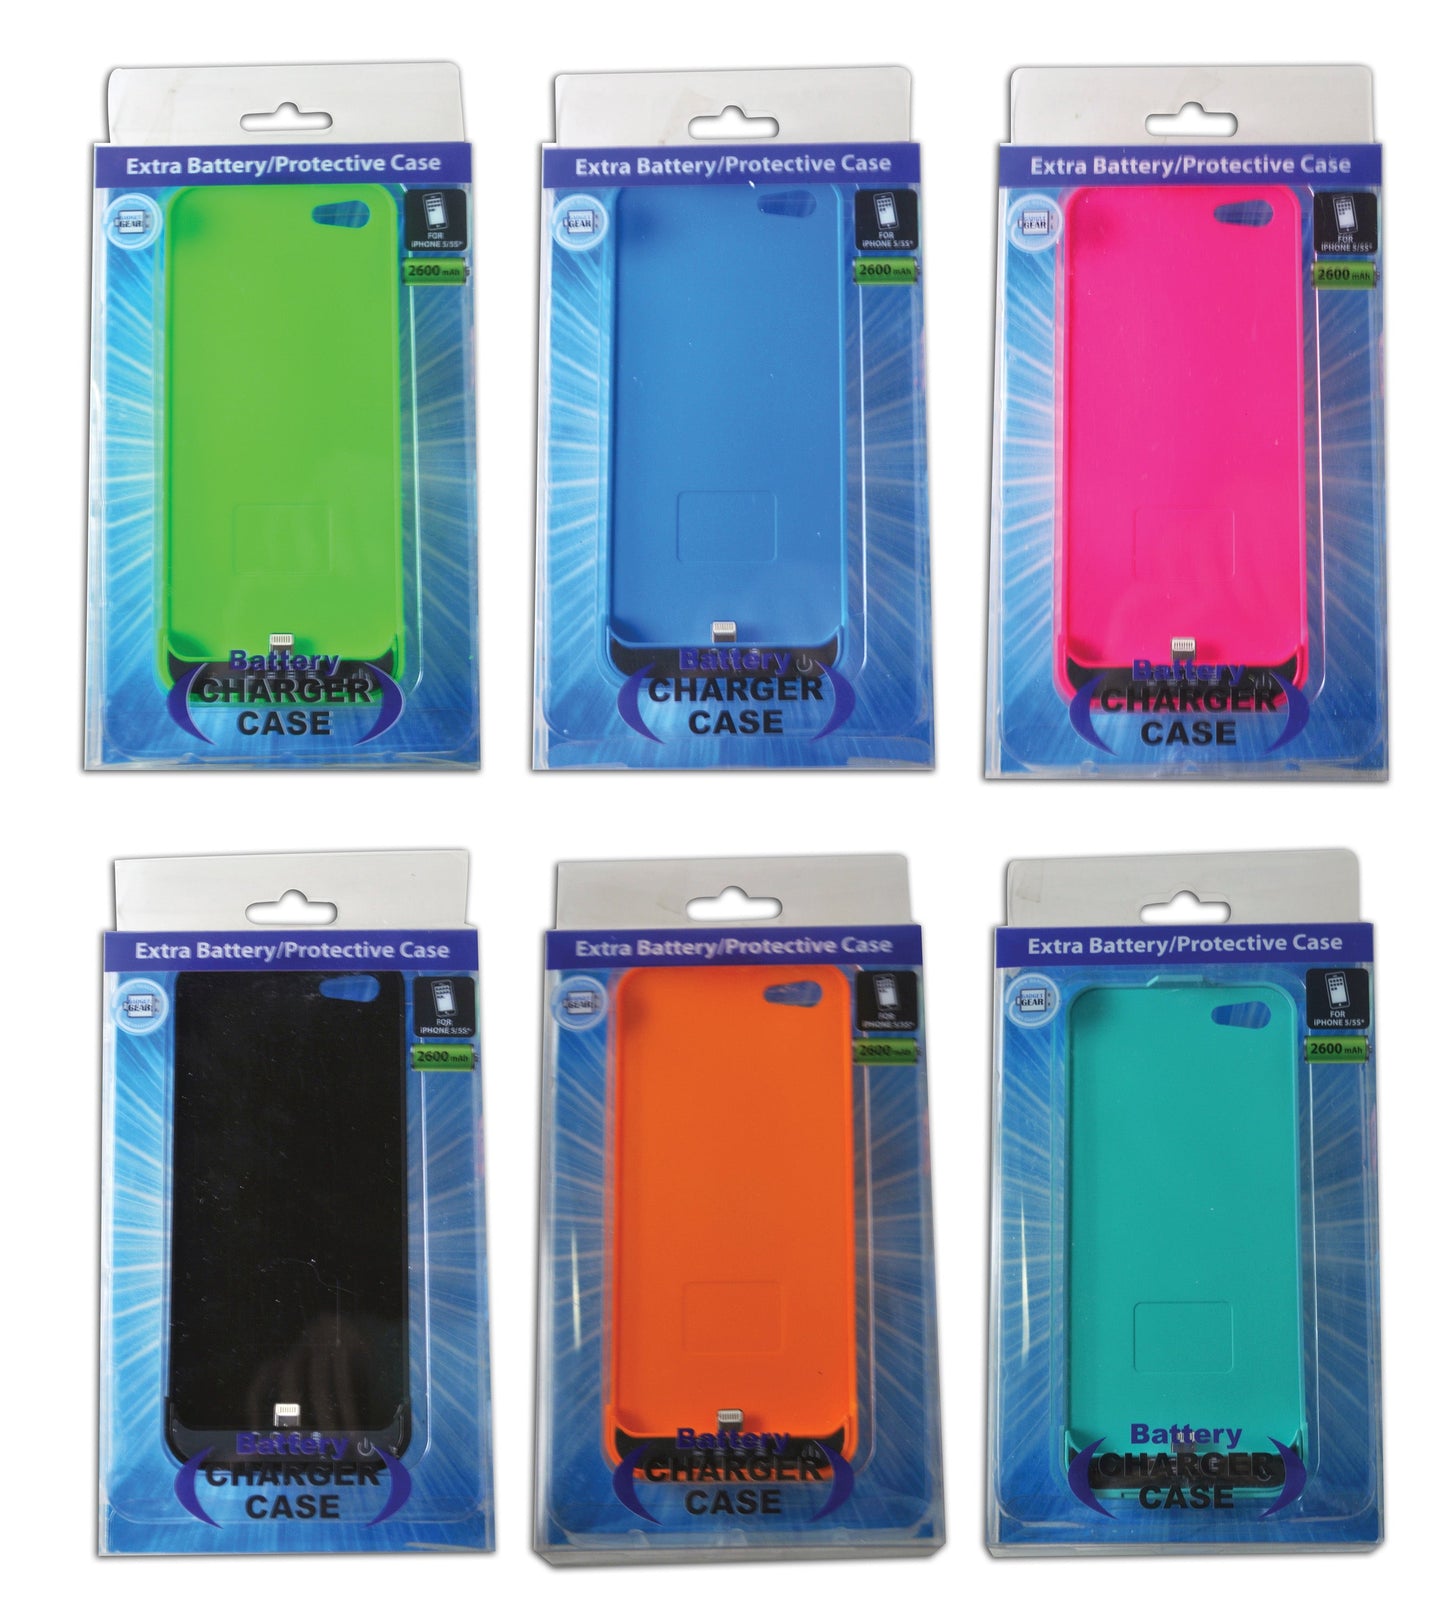 ITEM NUMBER 020215 POWER BANK CASE IP4 - 6 PIECES PER PACK